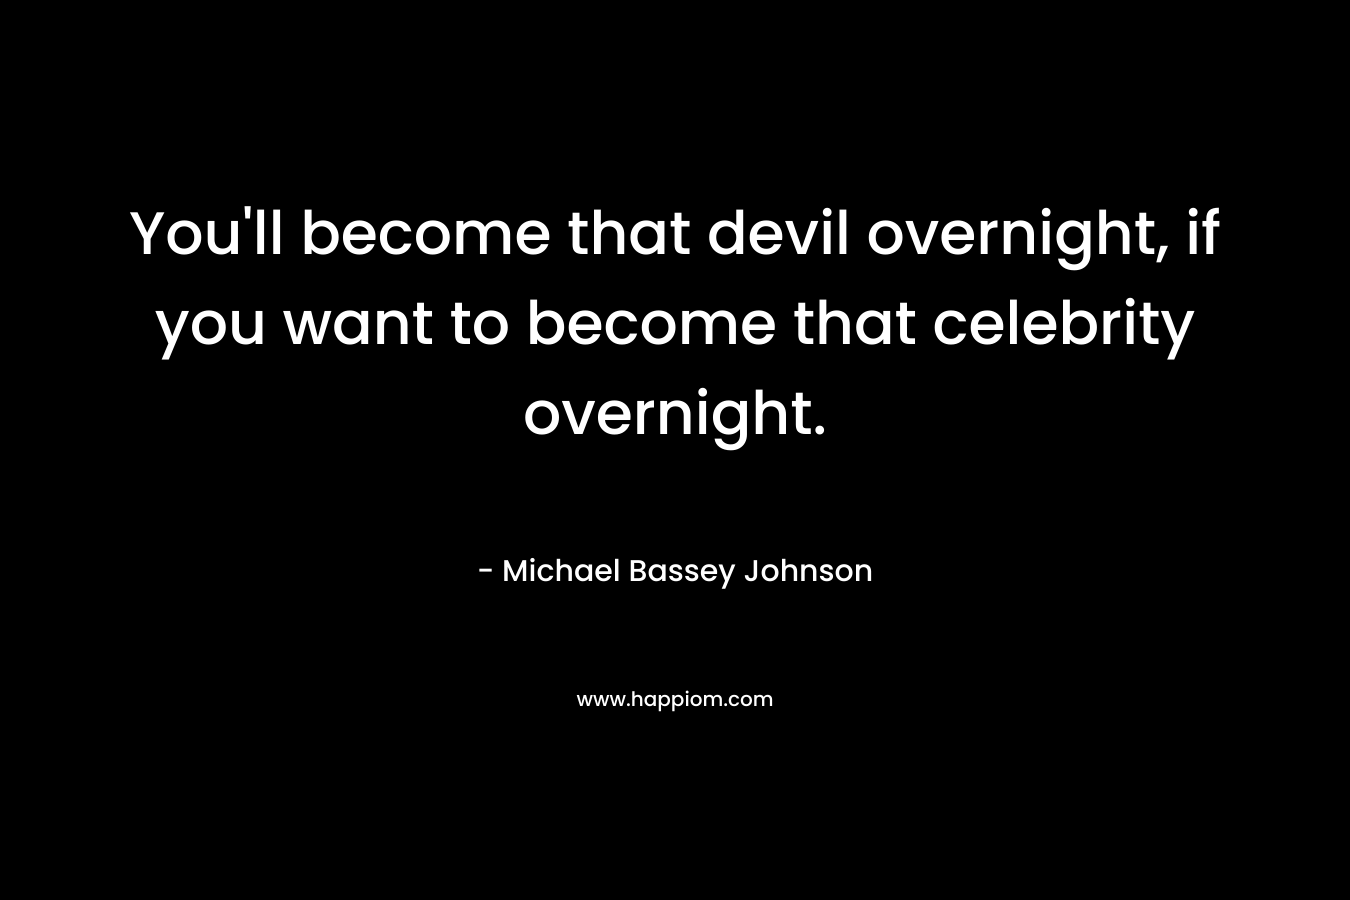 You'll become that devil overnight, if you want to become that celebrity overnight.